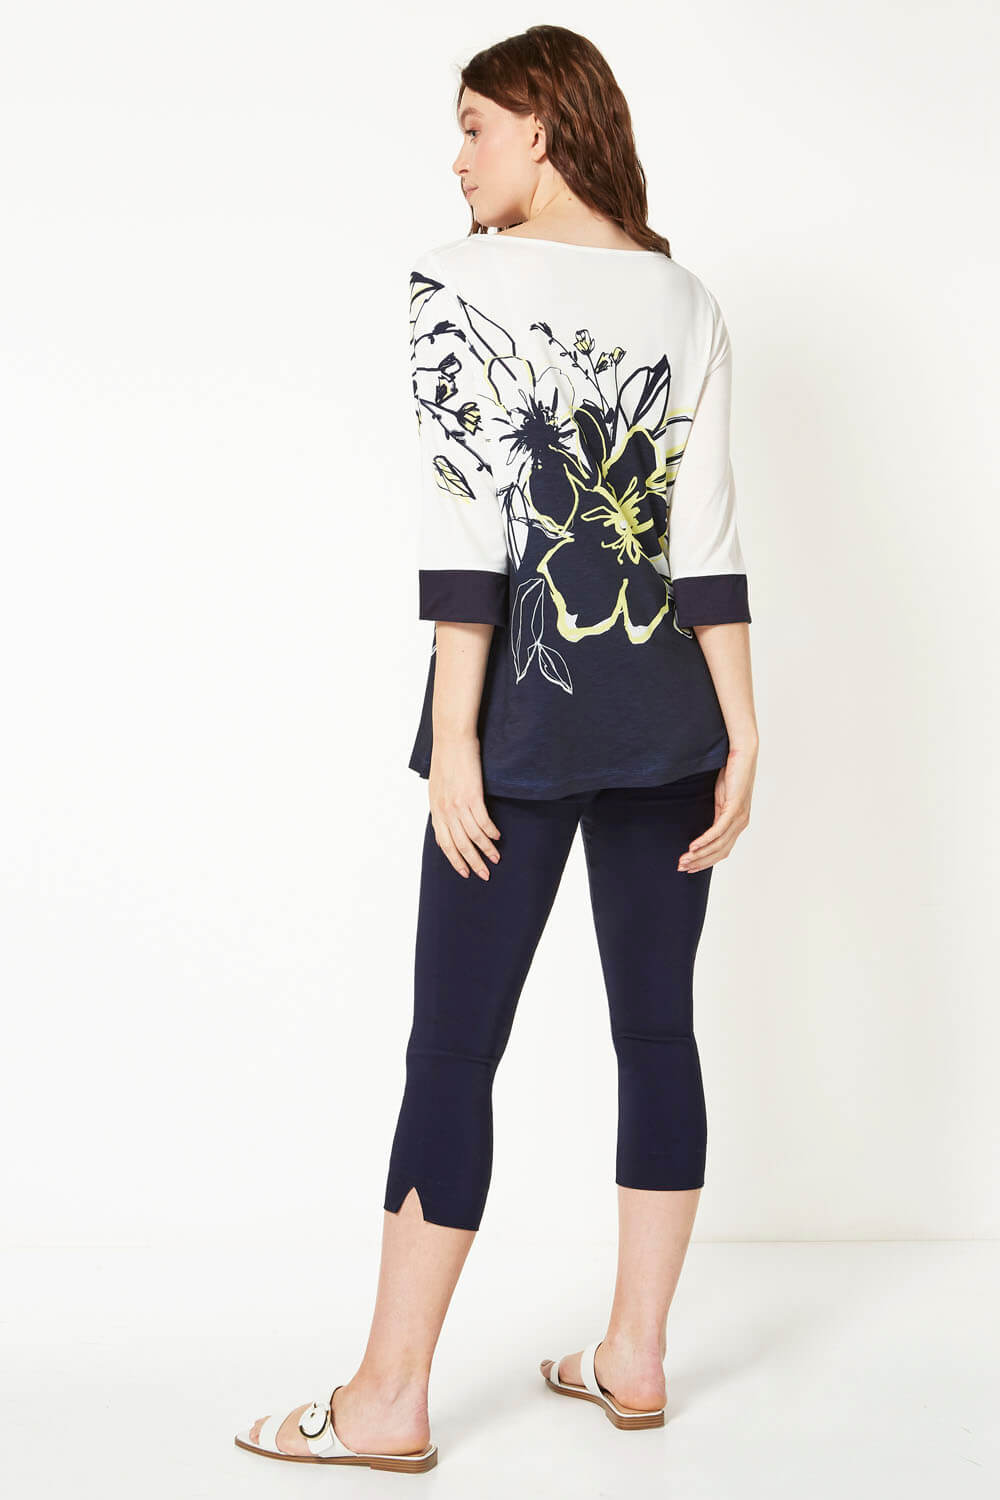 Navy  Floral Print Contrast Top, Image 3 of 5